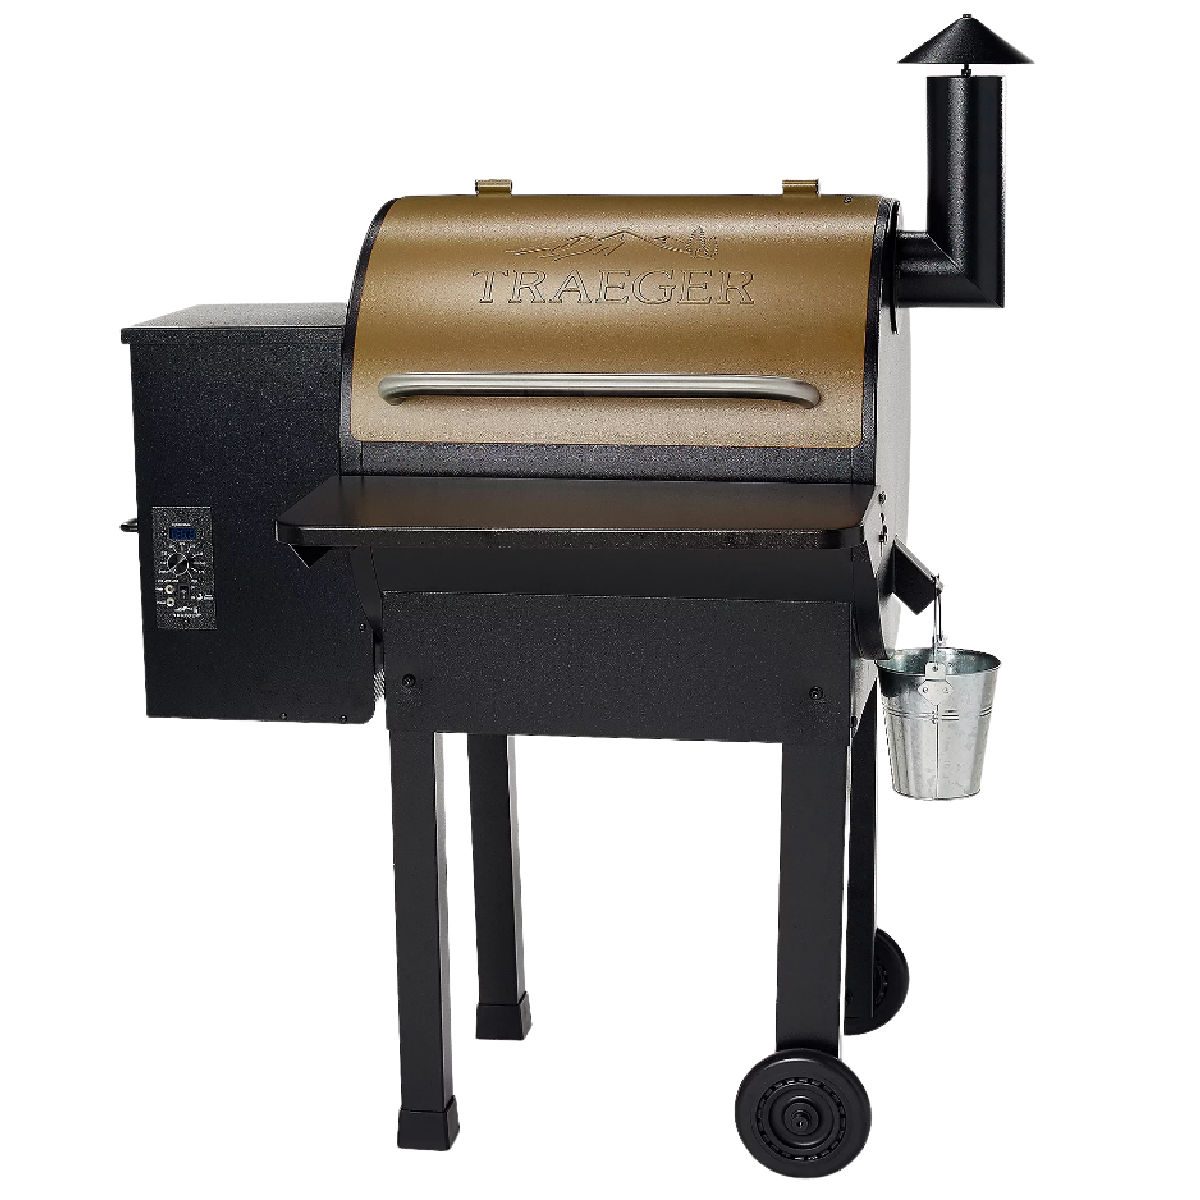 Traeger Homestead Wood Fired Grill & Smoker